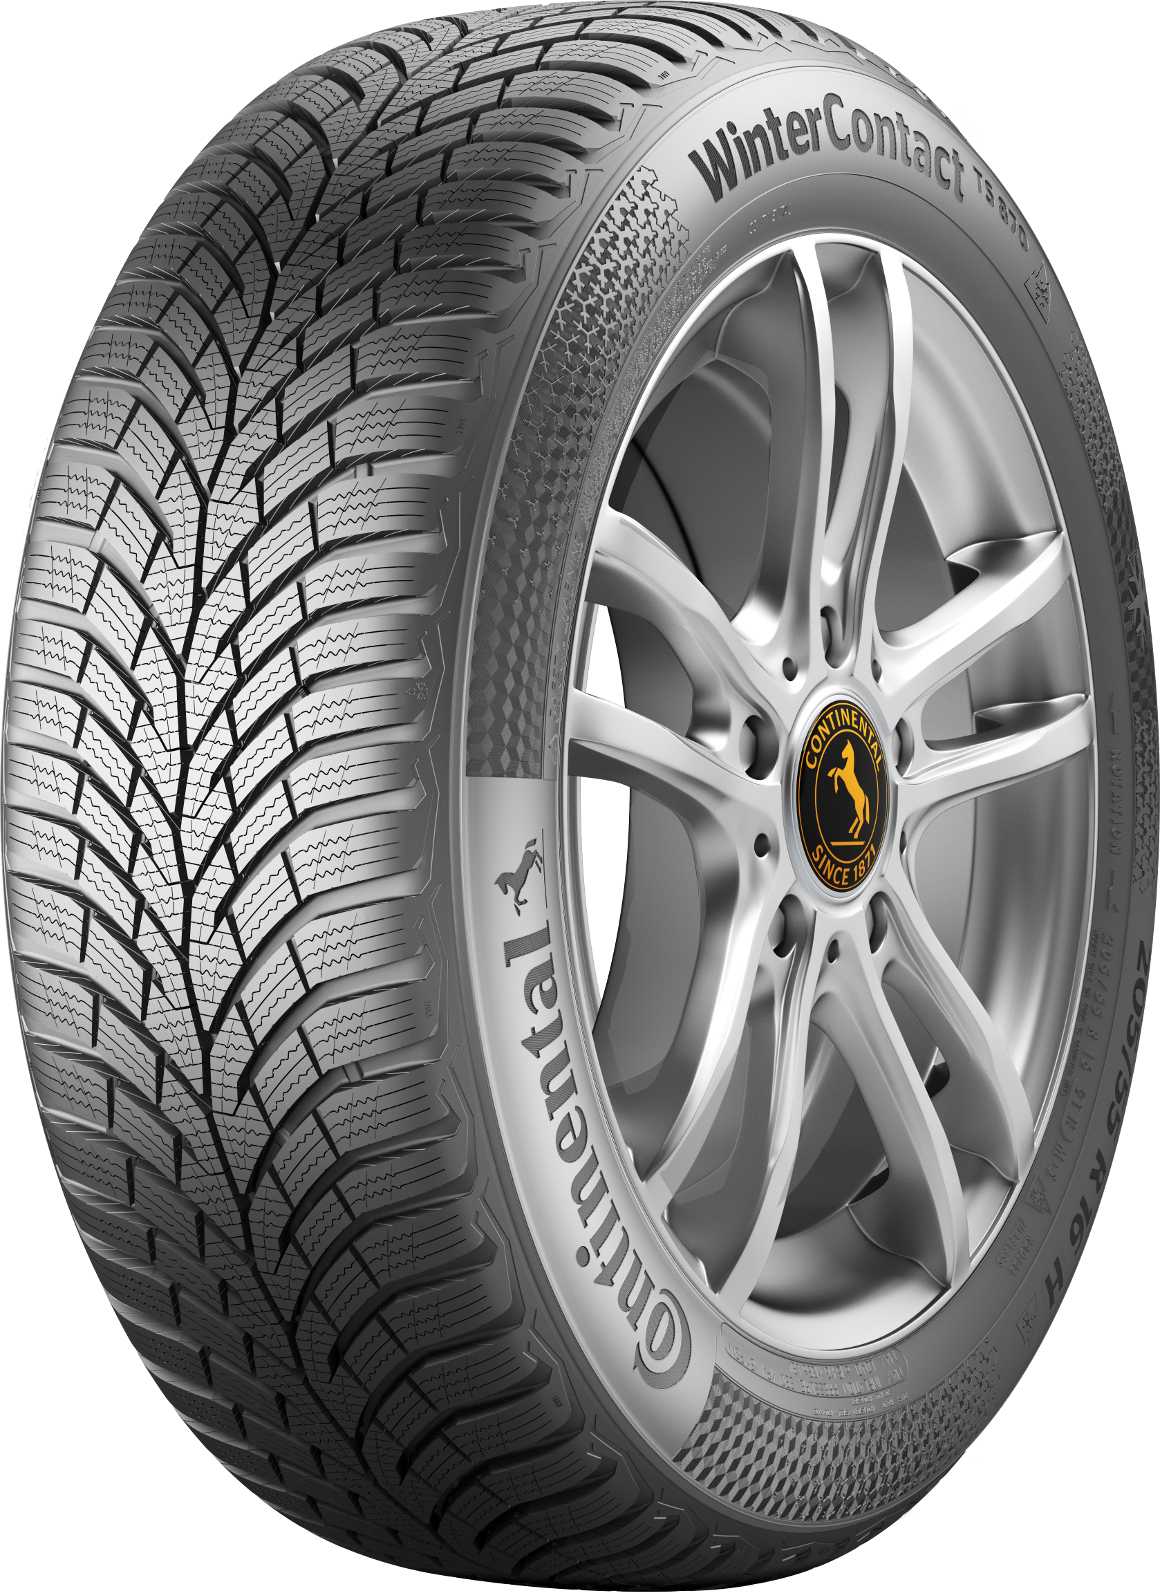    Continental Winter Contact TS870 195/45 R16 